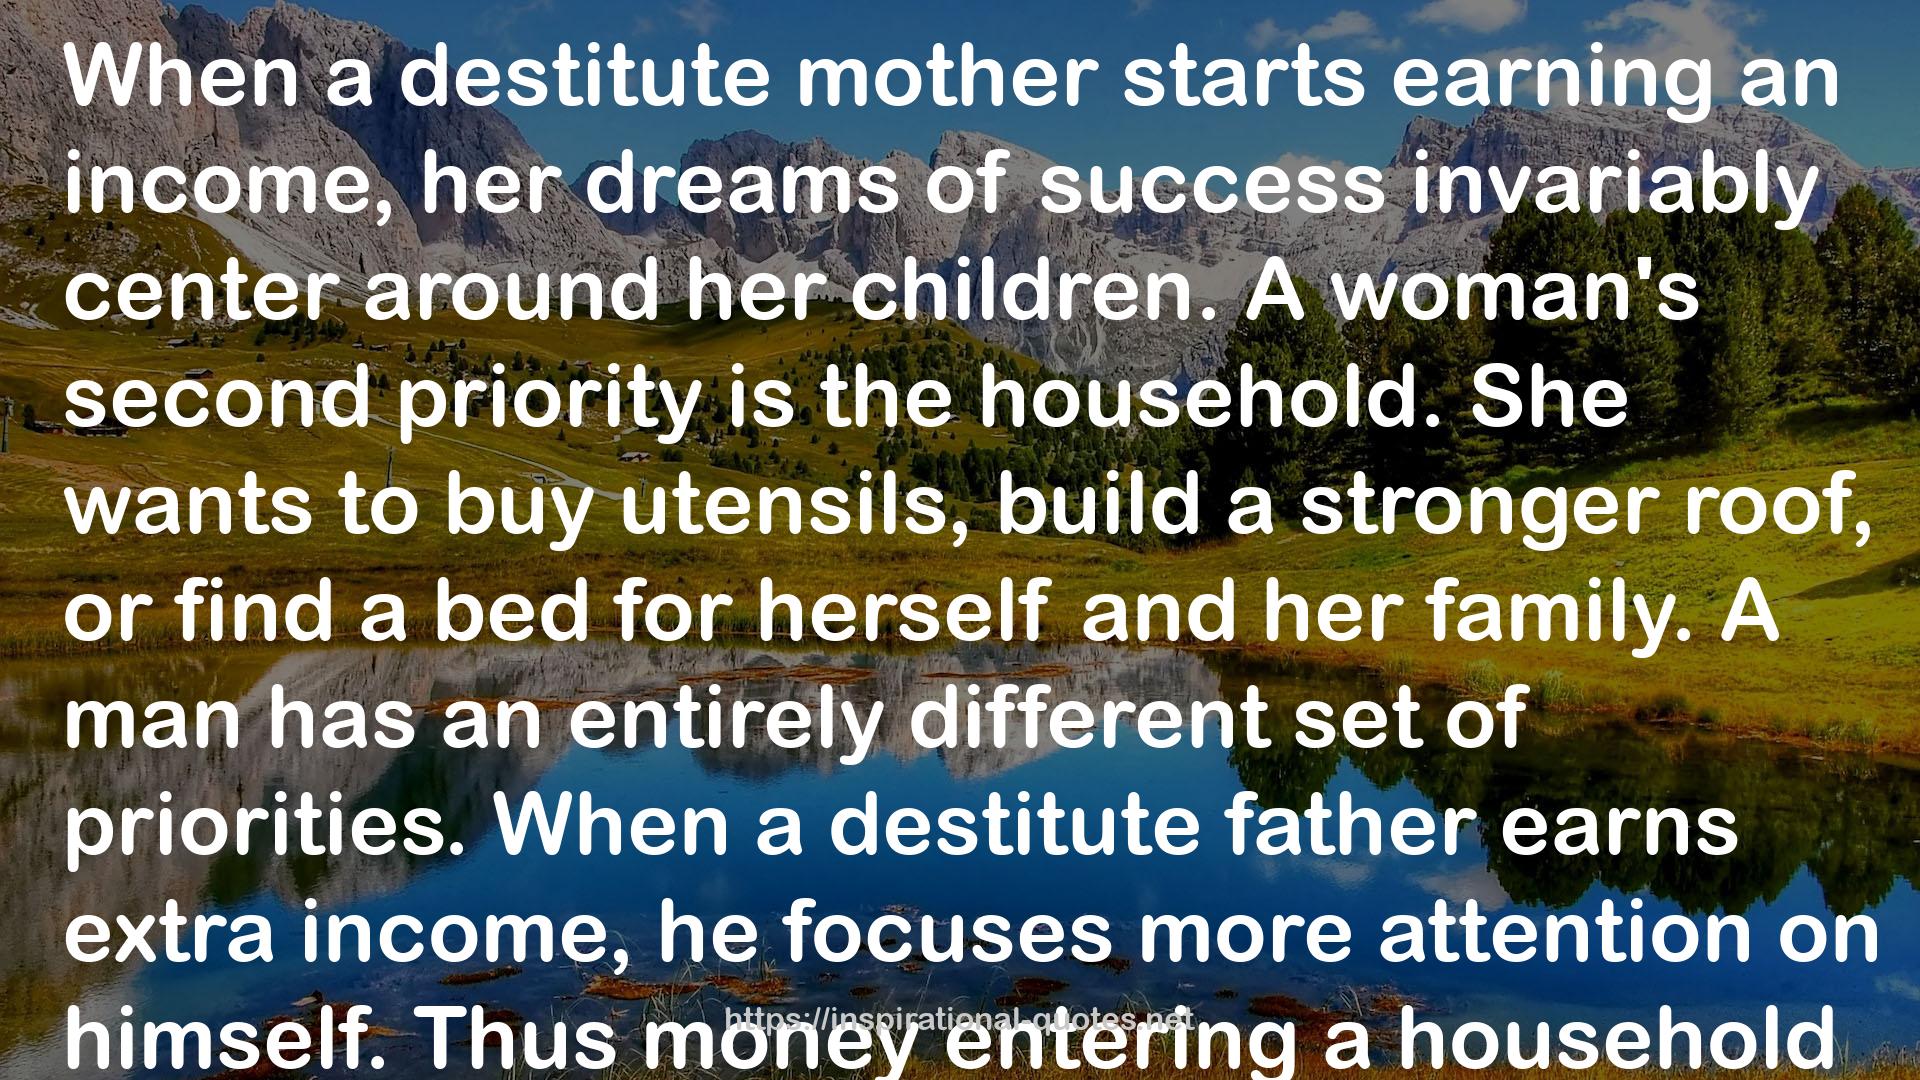 a destitute mother  QUOTES